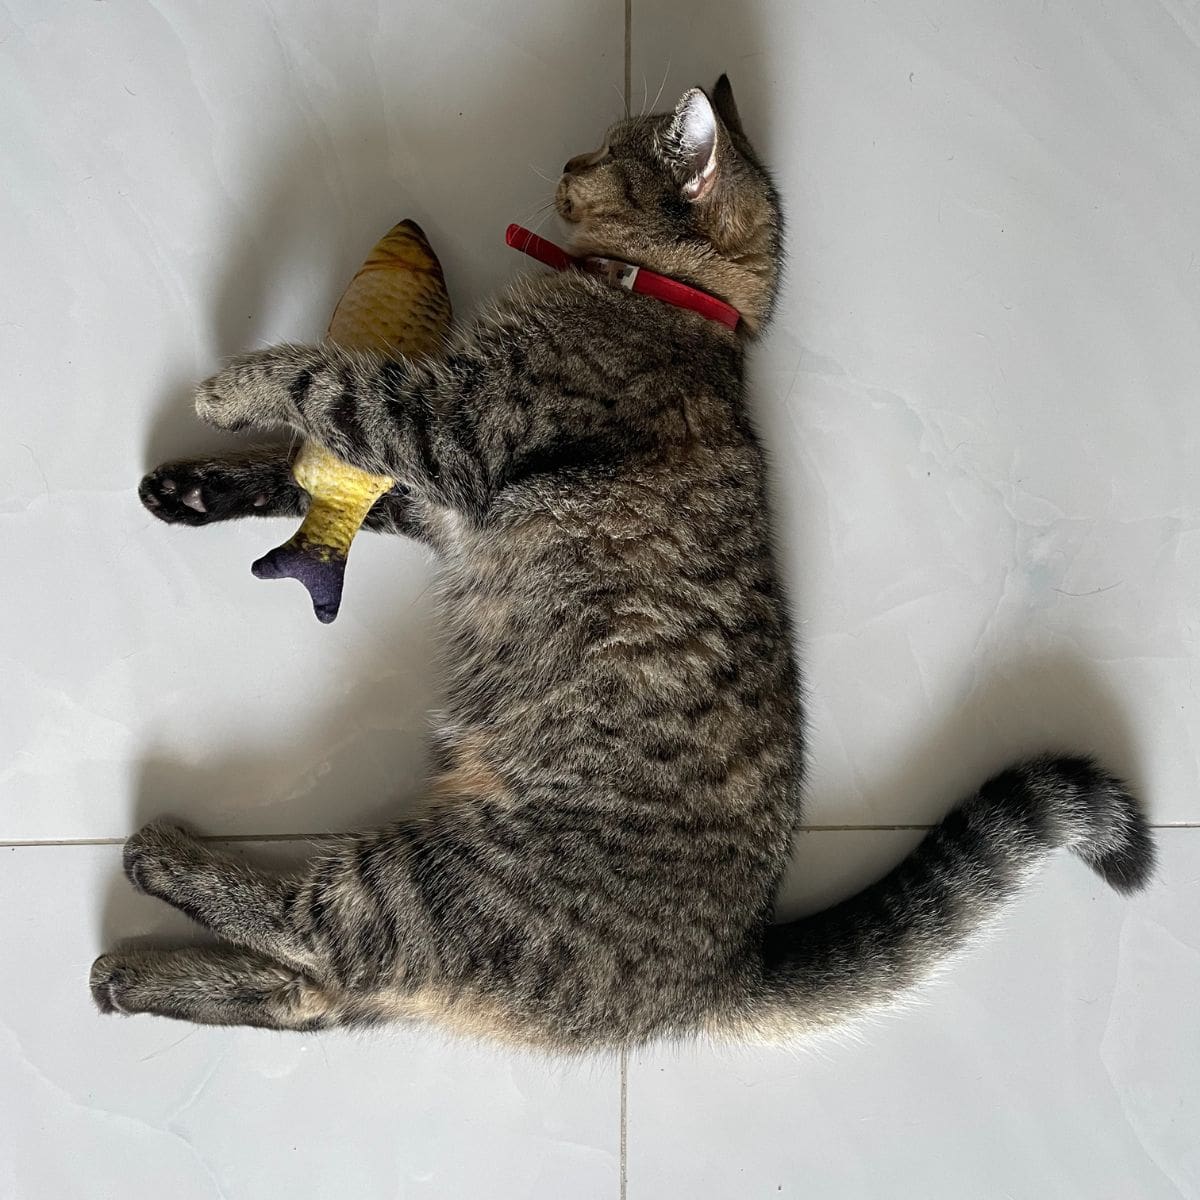 Cat laying on the floor with a fish between front legs